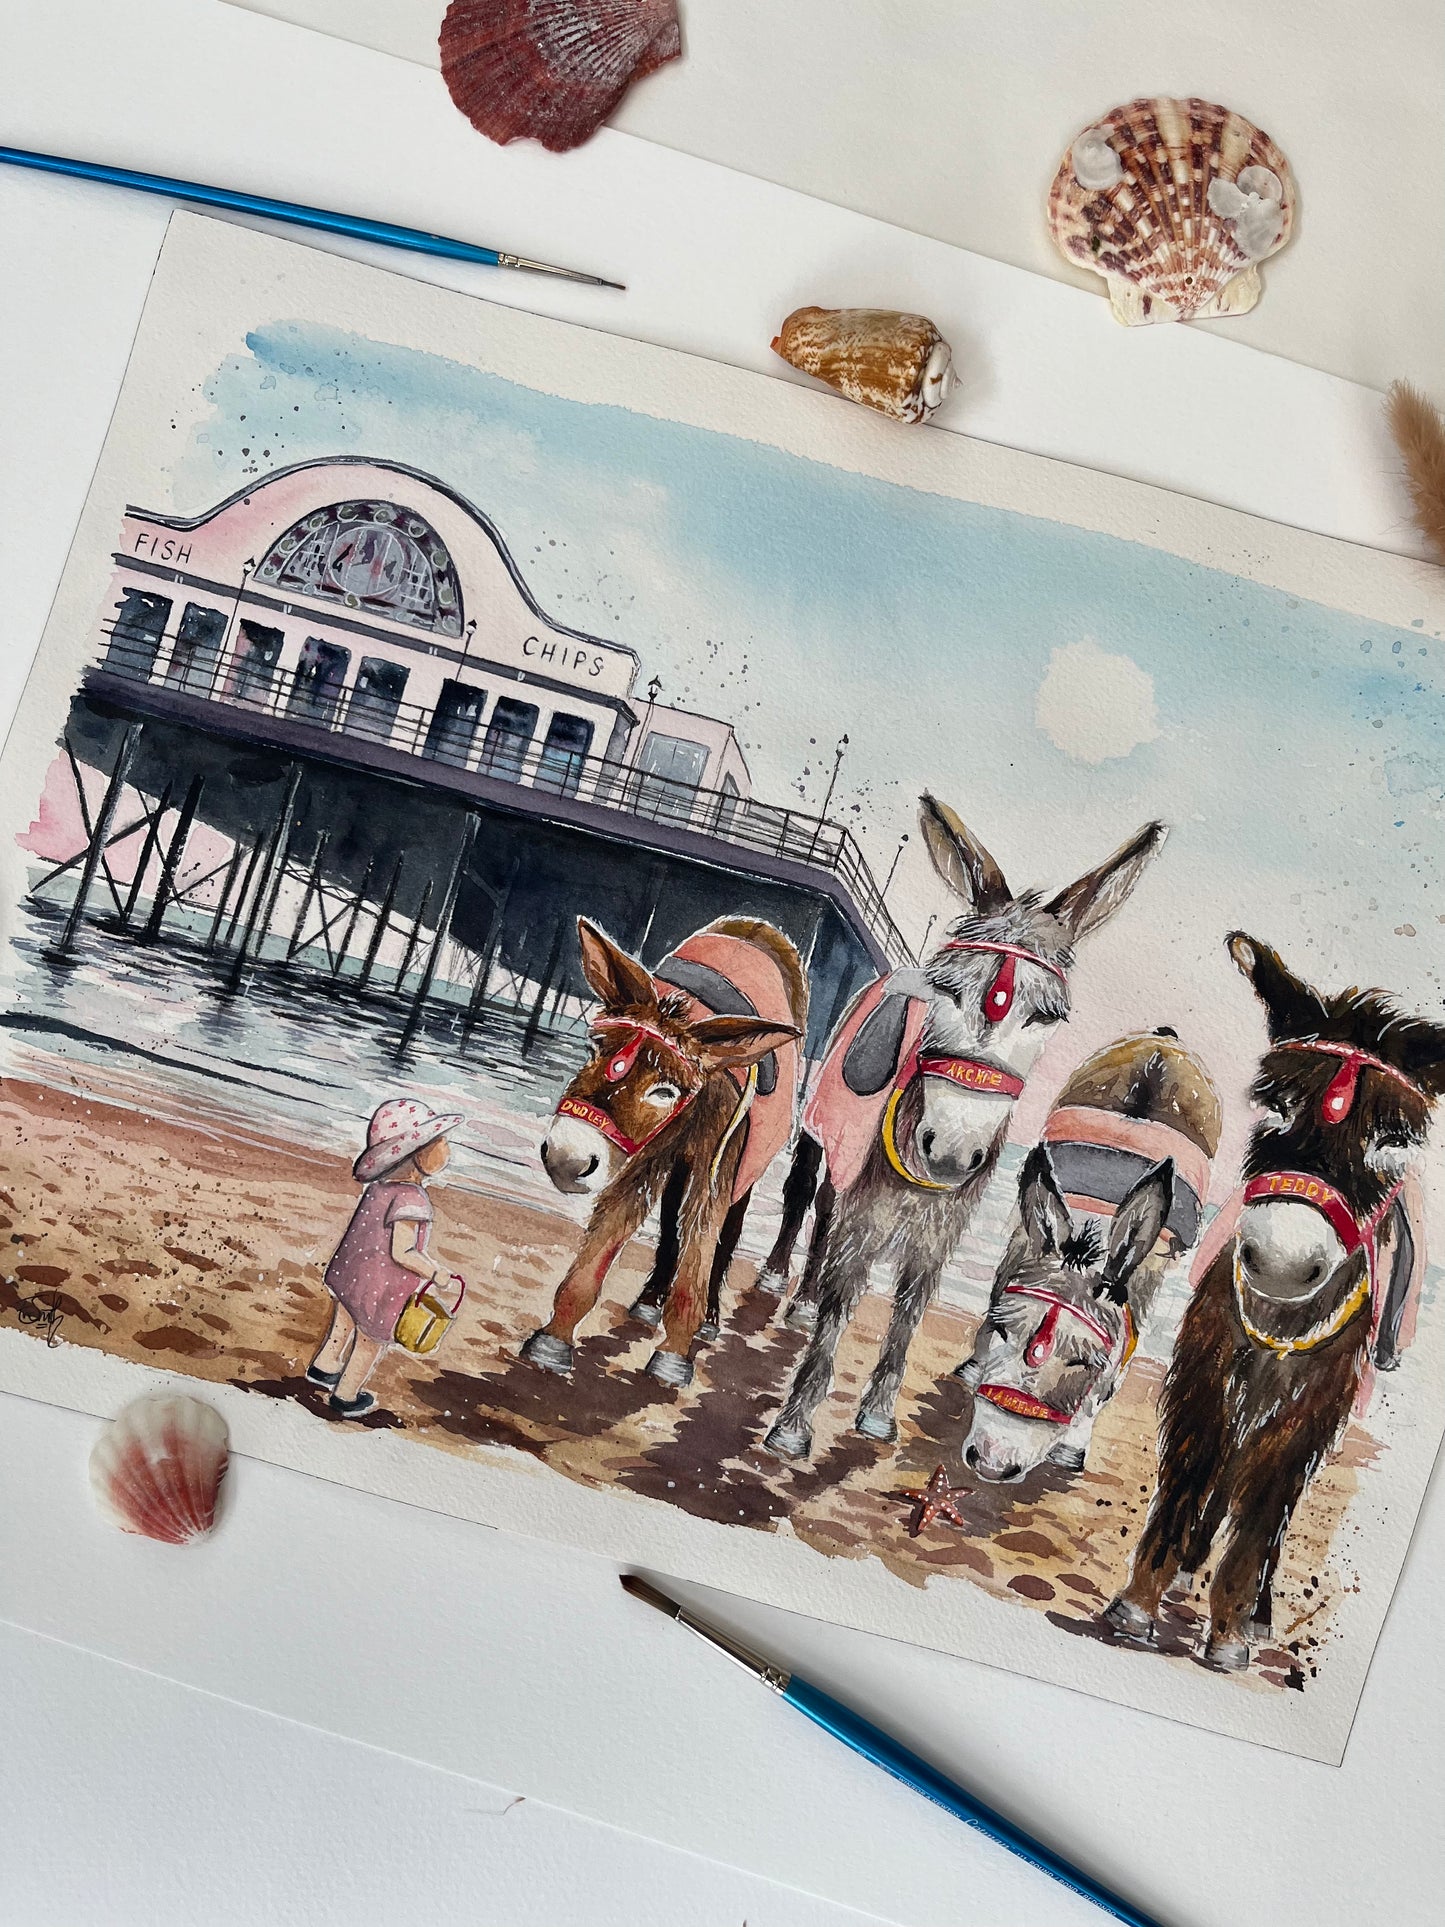 These charming donkeys on in front of Cleethorpes pier have been painted in watercolours by local Grimsby artist, Eve Leoni Smith.